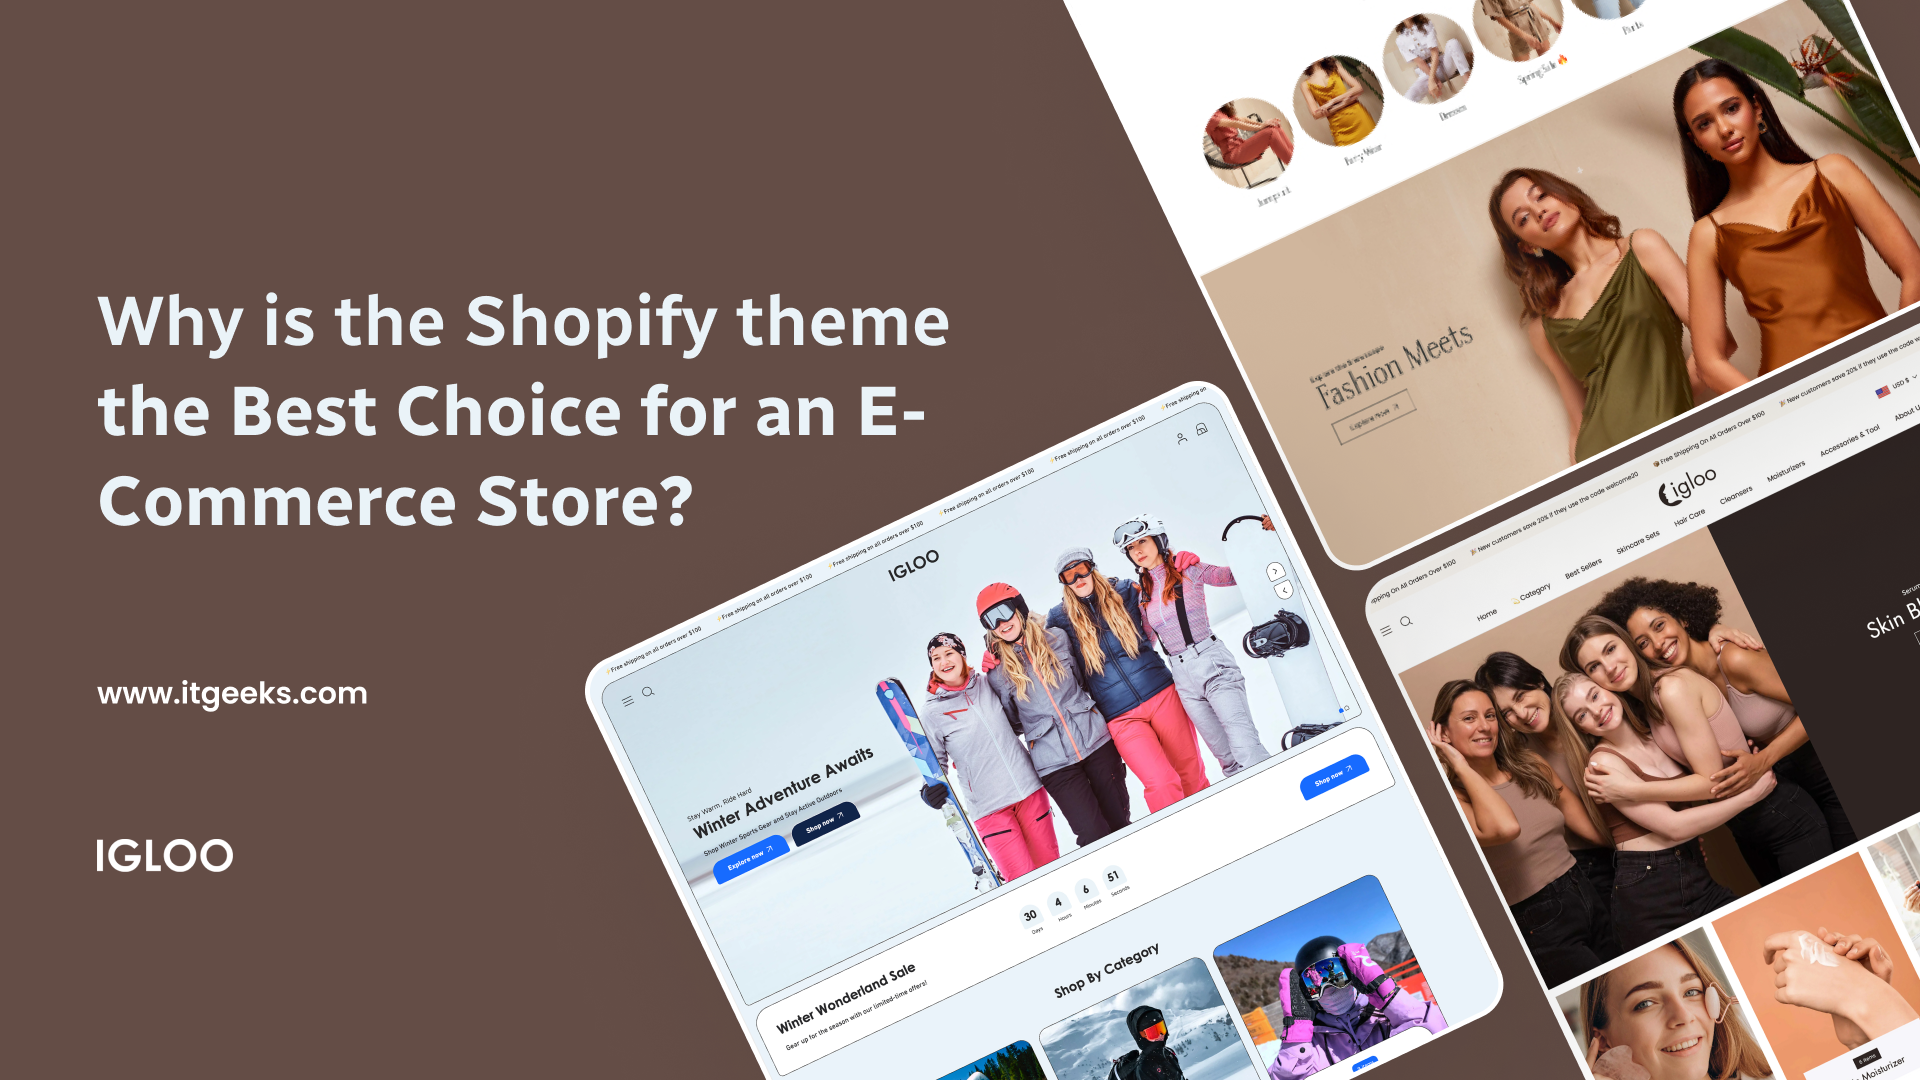 Why is the Shopify theme the best choice for an e-commerce store